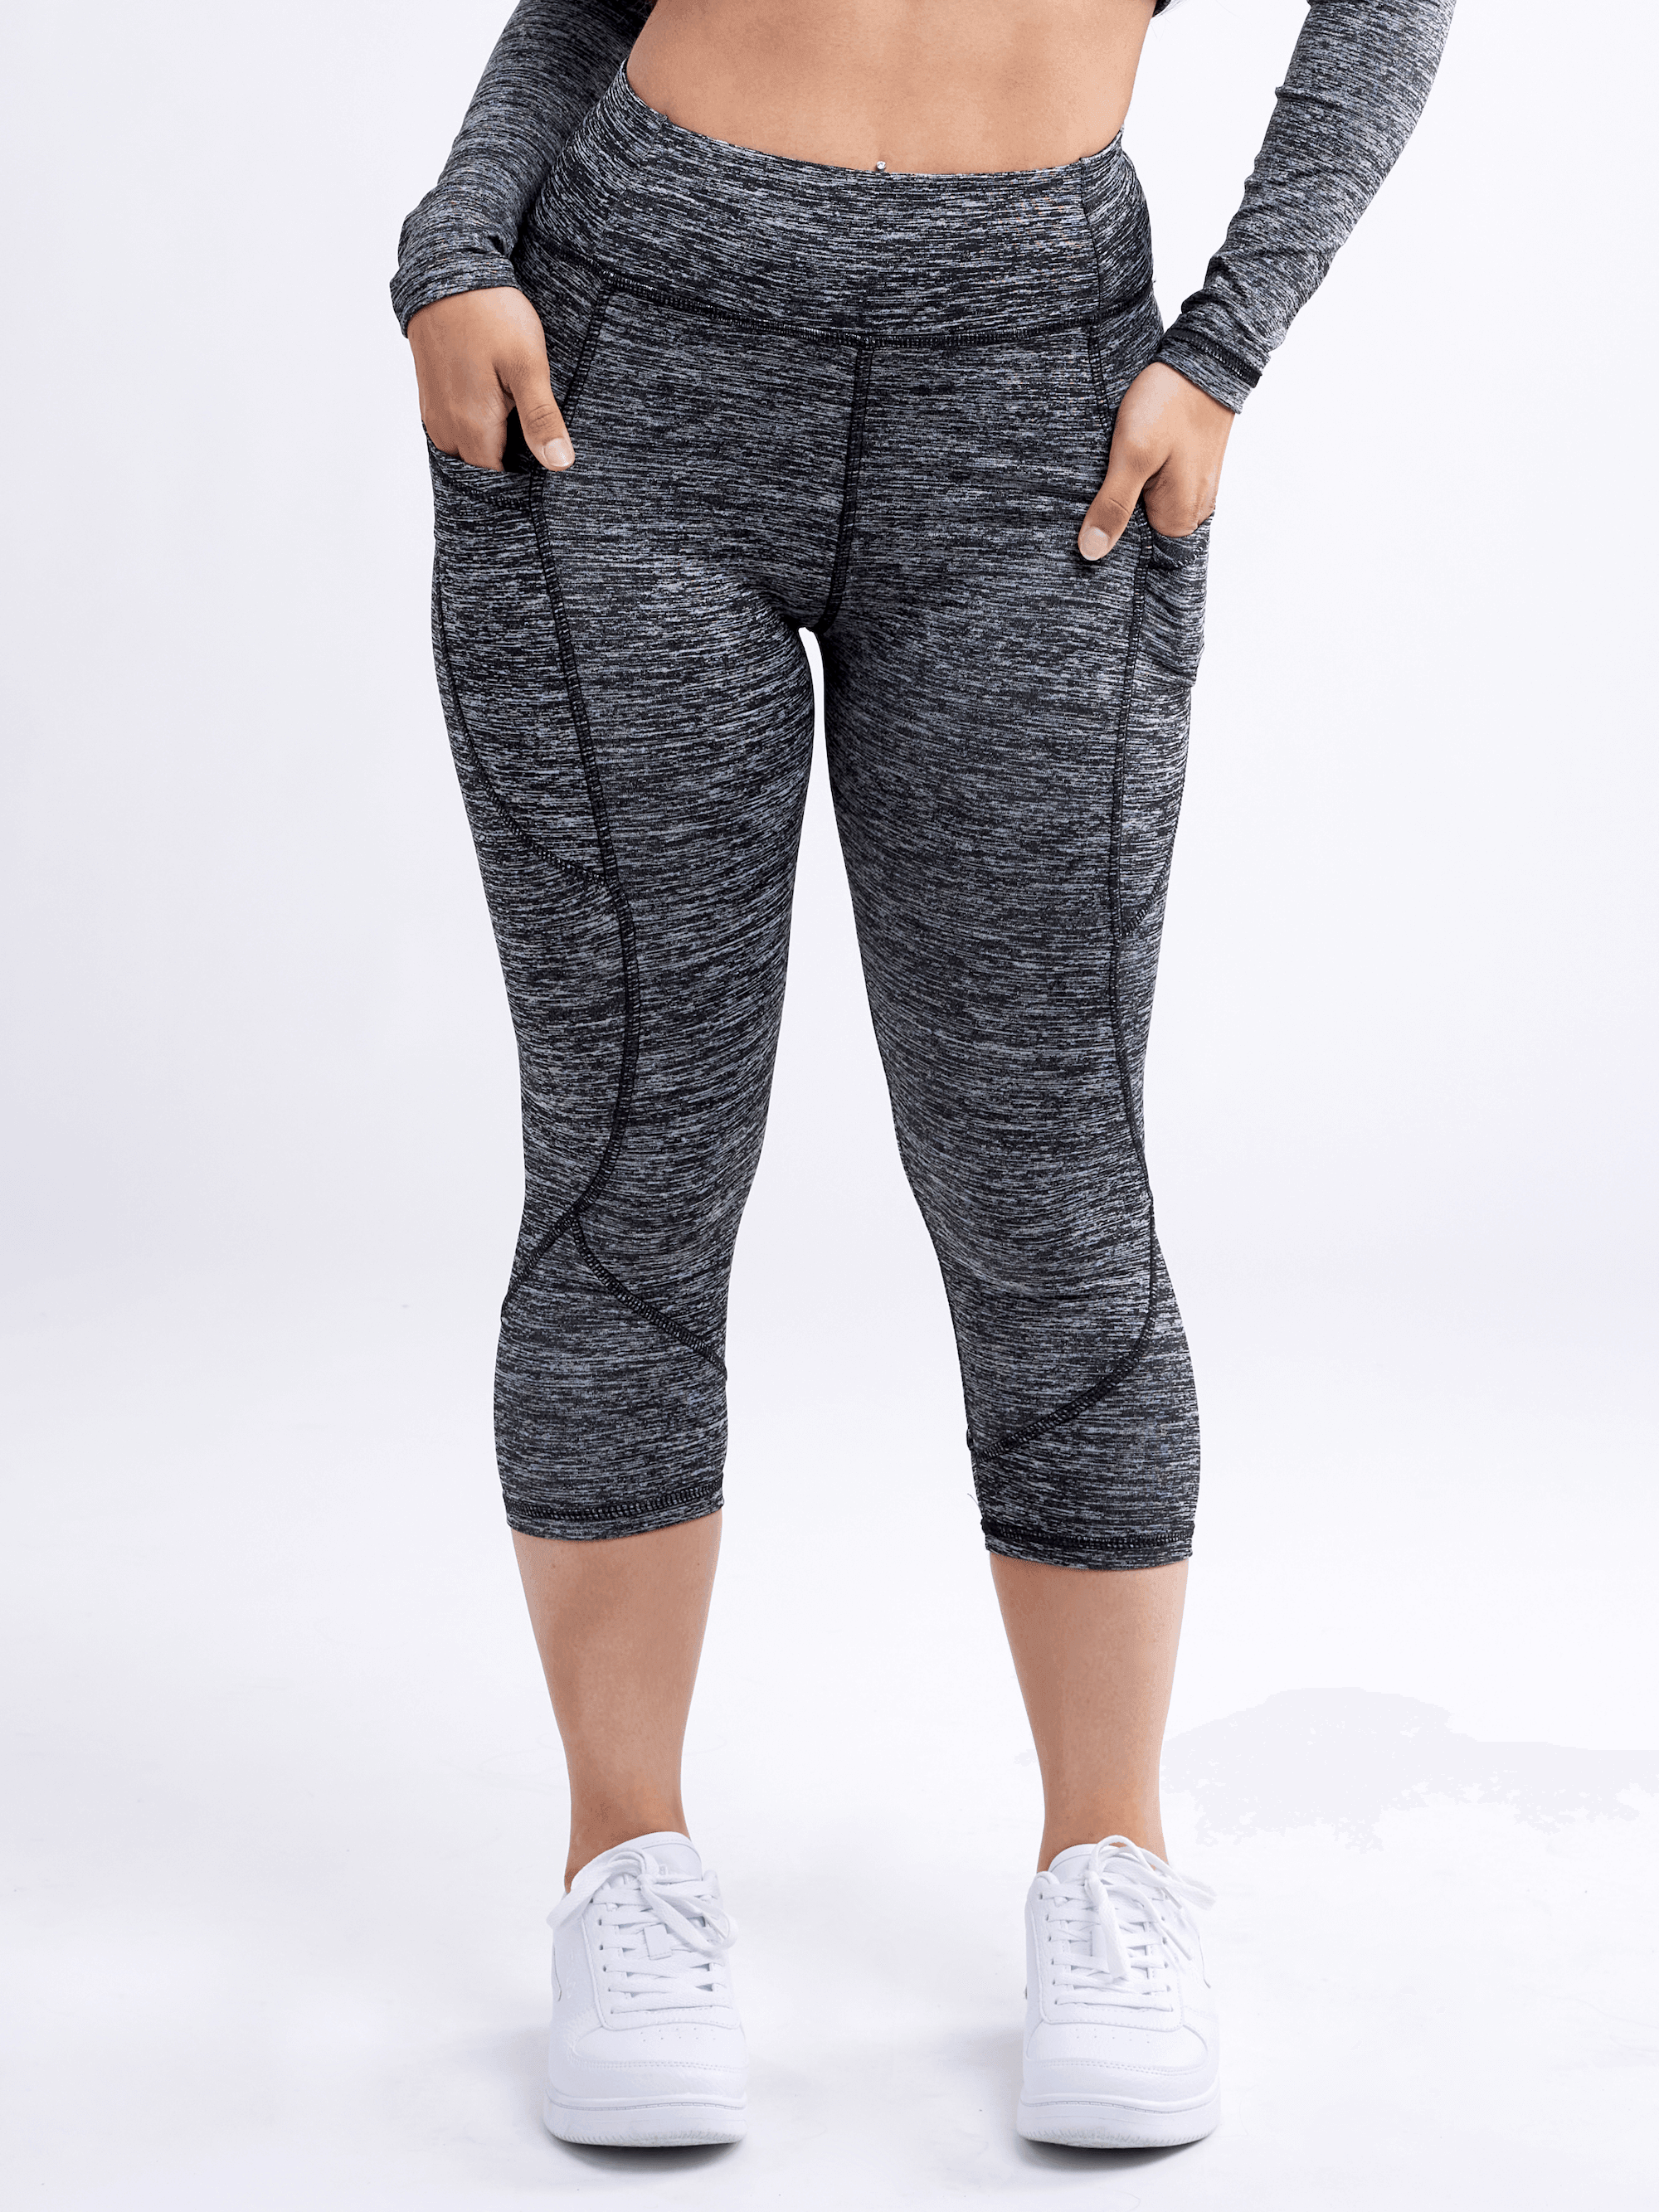 Mid-Rise Capri Fitness Leggings with Side Pockets - VirtuousWares:Global